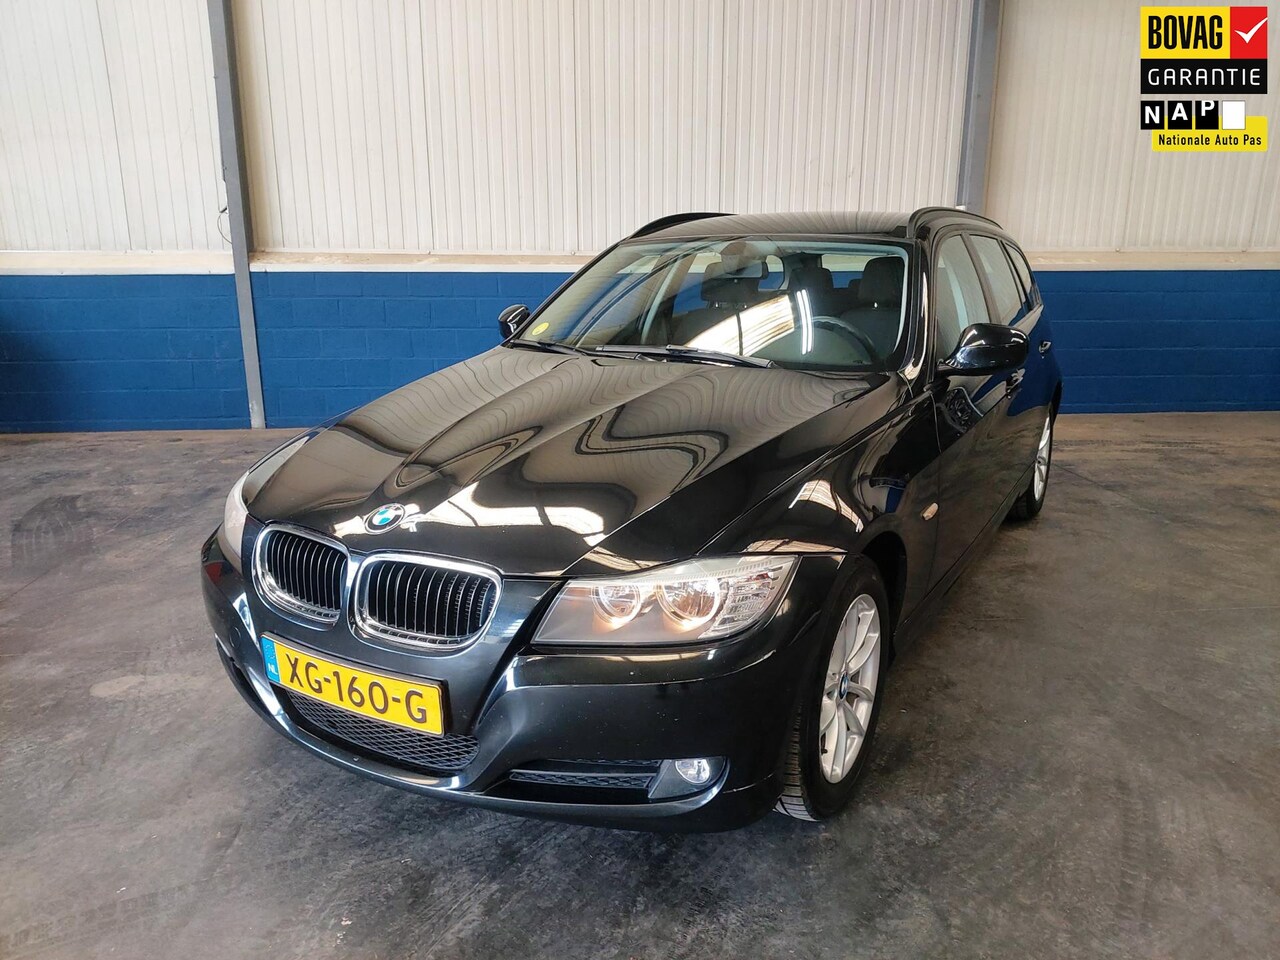 BMW 3-serie Touring - 318d Corporate Lease Luxury Line 318d Corporate Lease Luxury Line - AutoWereld.nl